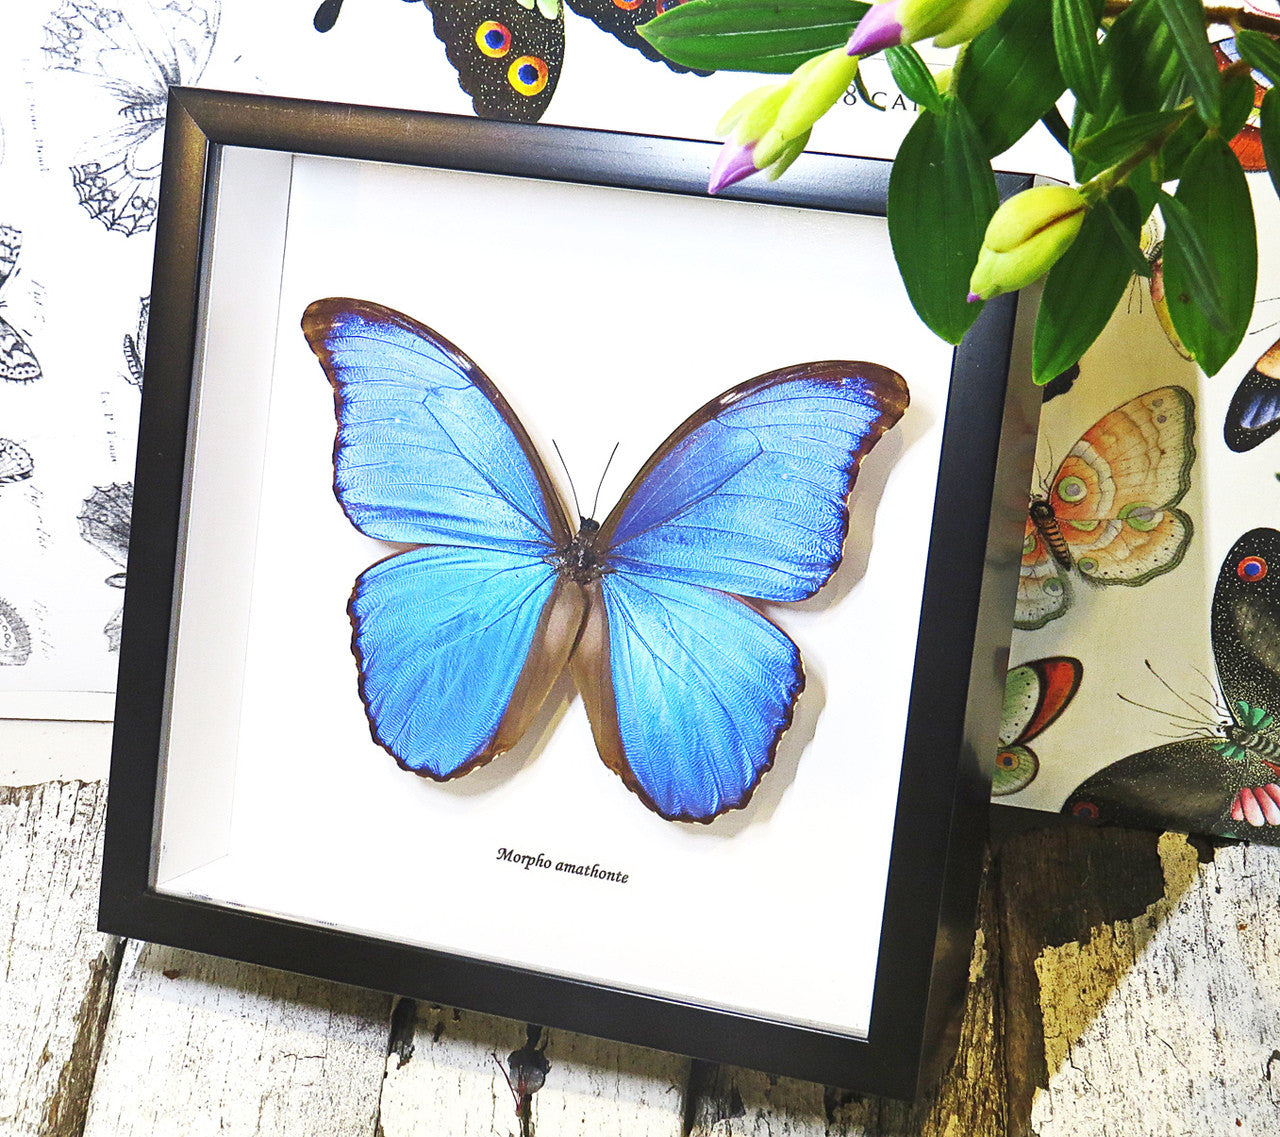 Luna Lovewitch Enchanted Creatures - Morpho Amathonte Butterfly